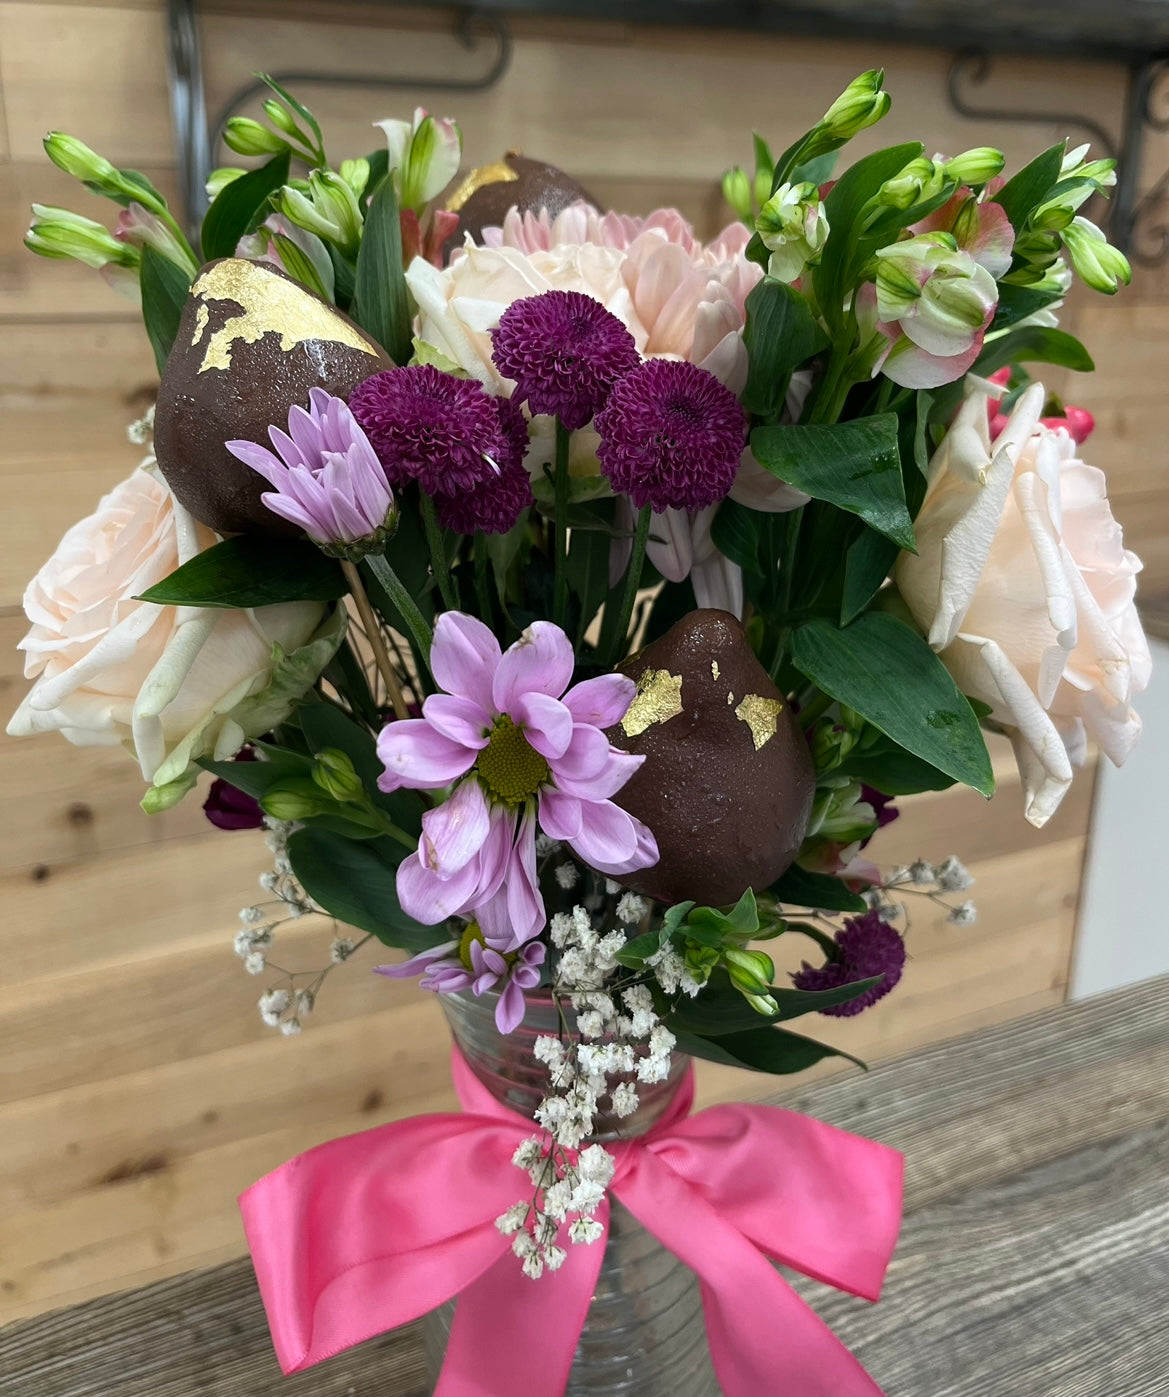 Chocolate Dipped Strawberry & Mixed Flower Bouquet